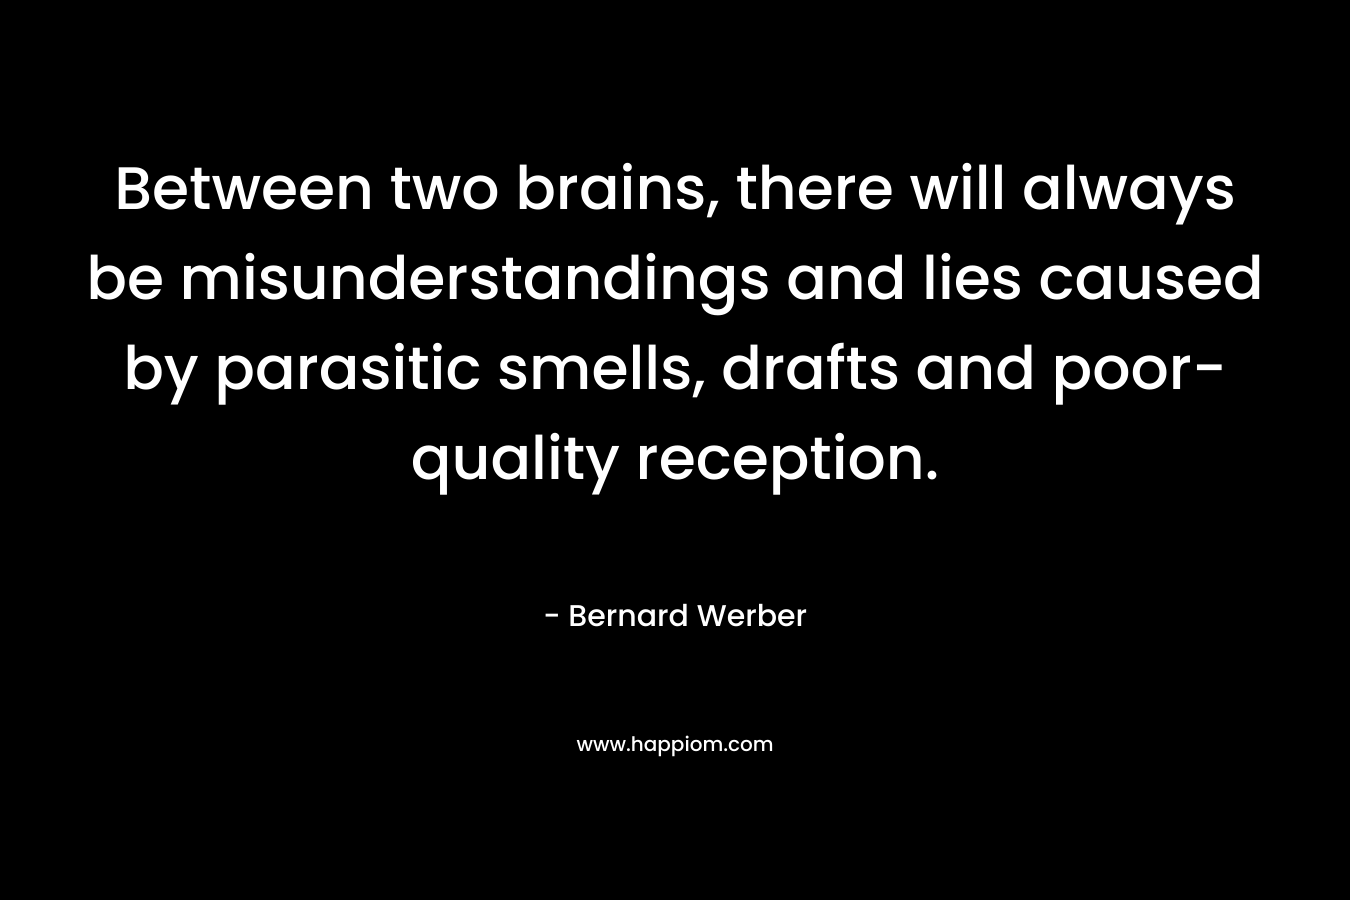 Between two brains, there will always be misunderstandings and lies caused by parasitic smells, drafts and poor-quality reception.